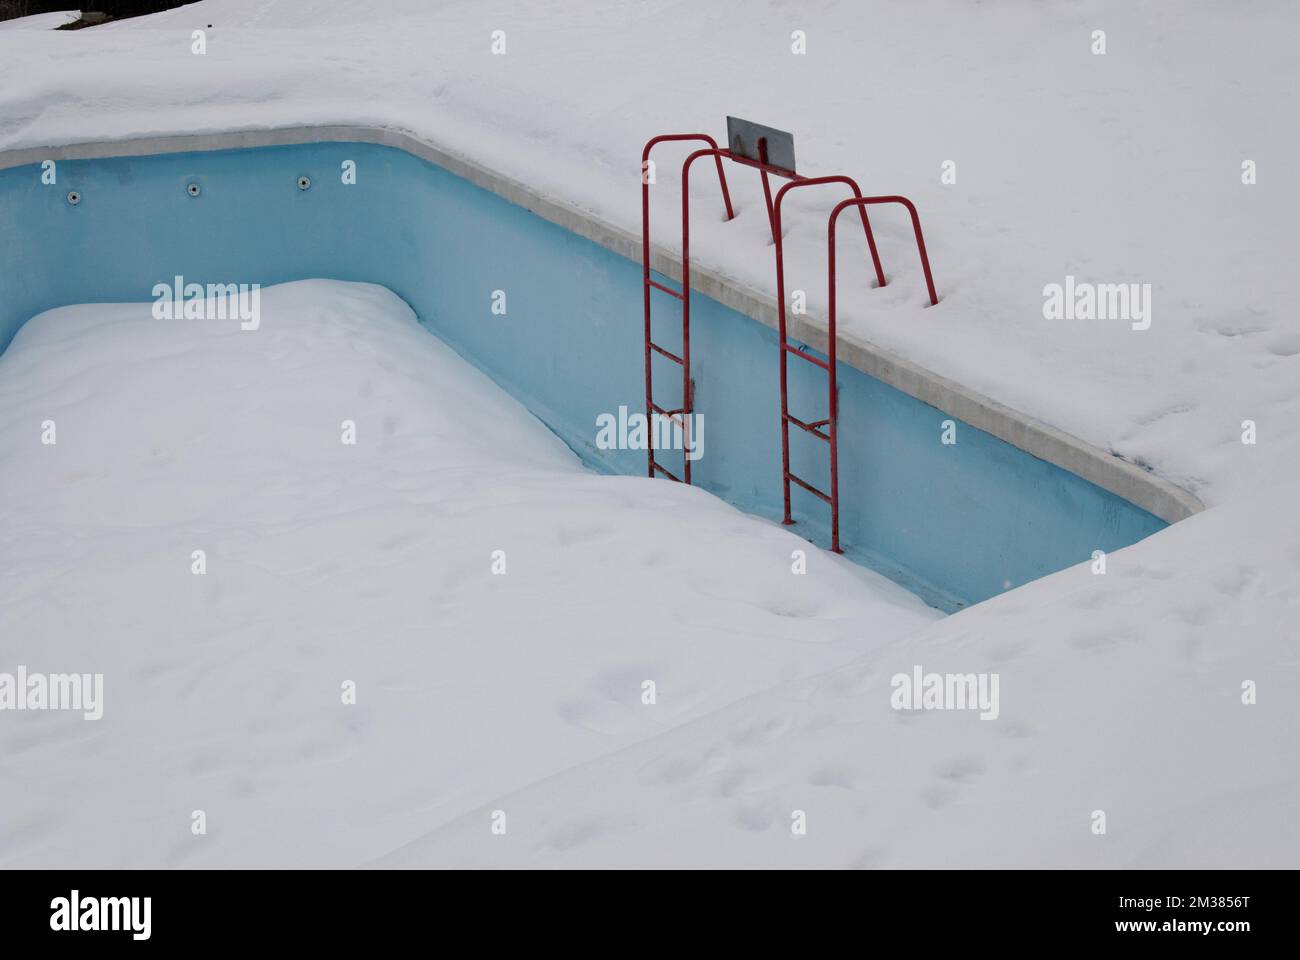 frozen swimming pool with boarding ladder Stock Photo